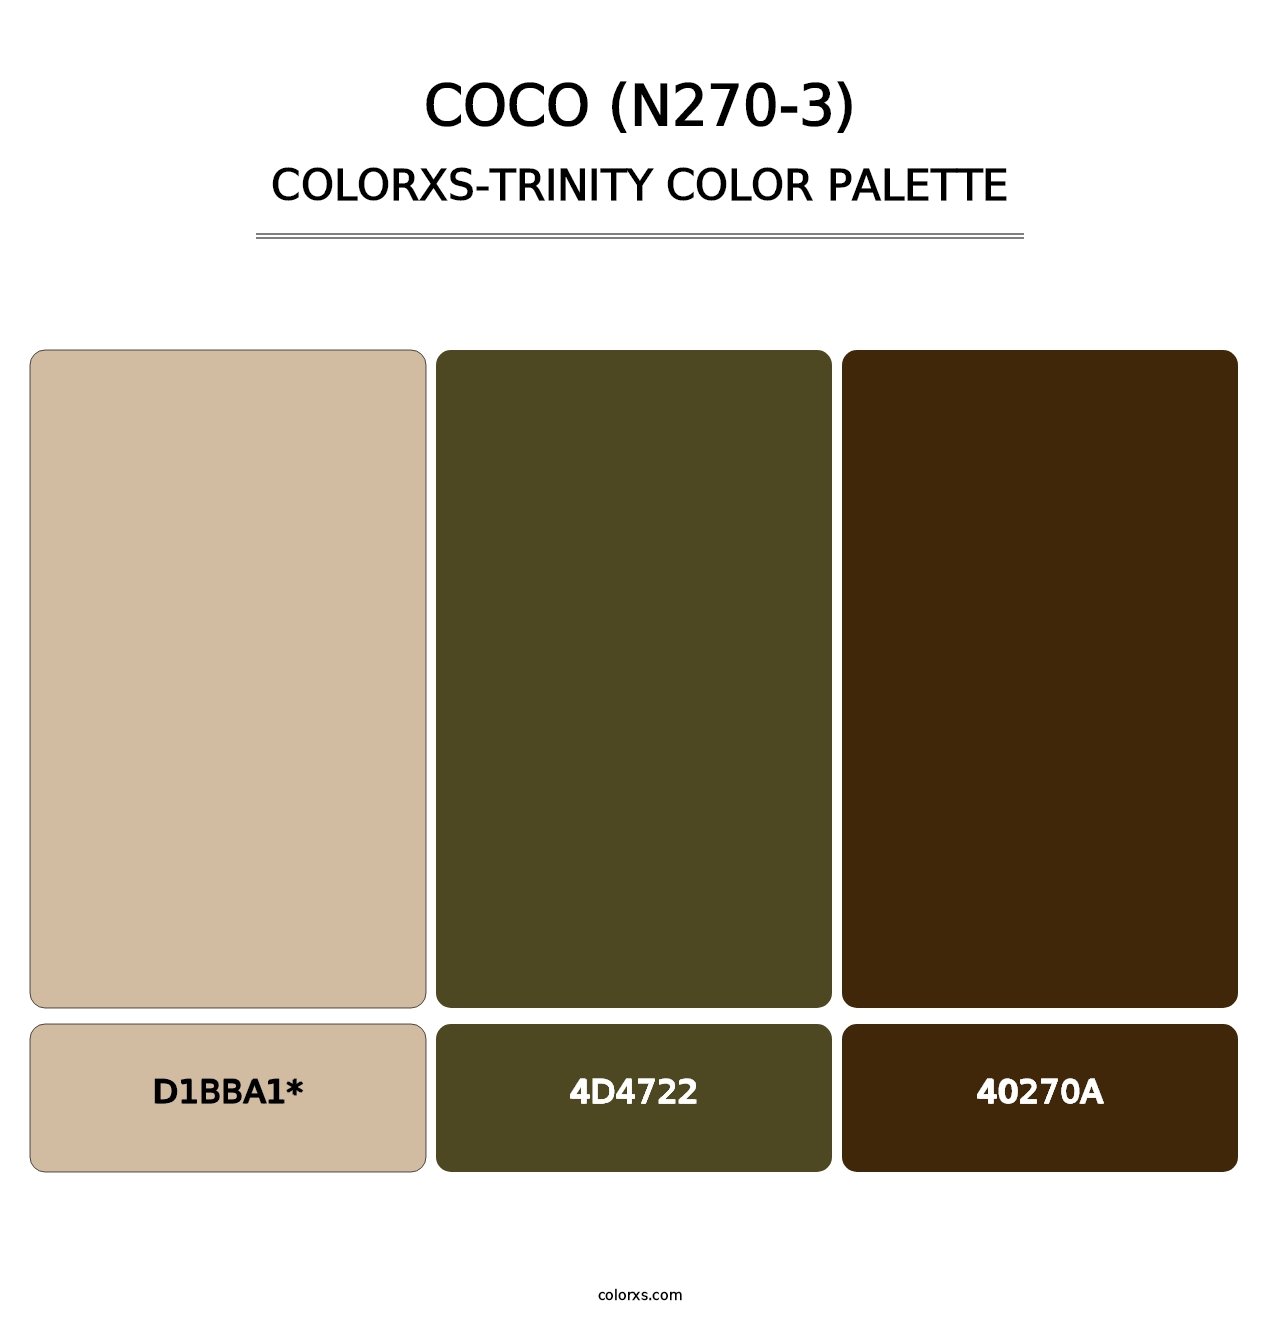 Coco (N270-3) - Colorxs Trinity Palette